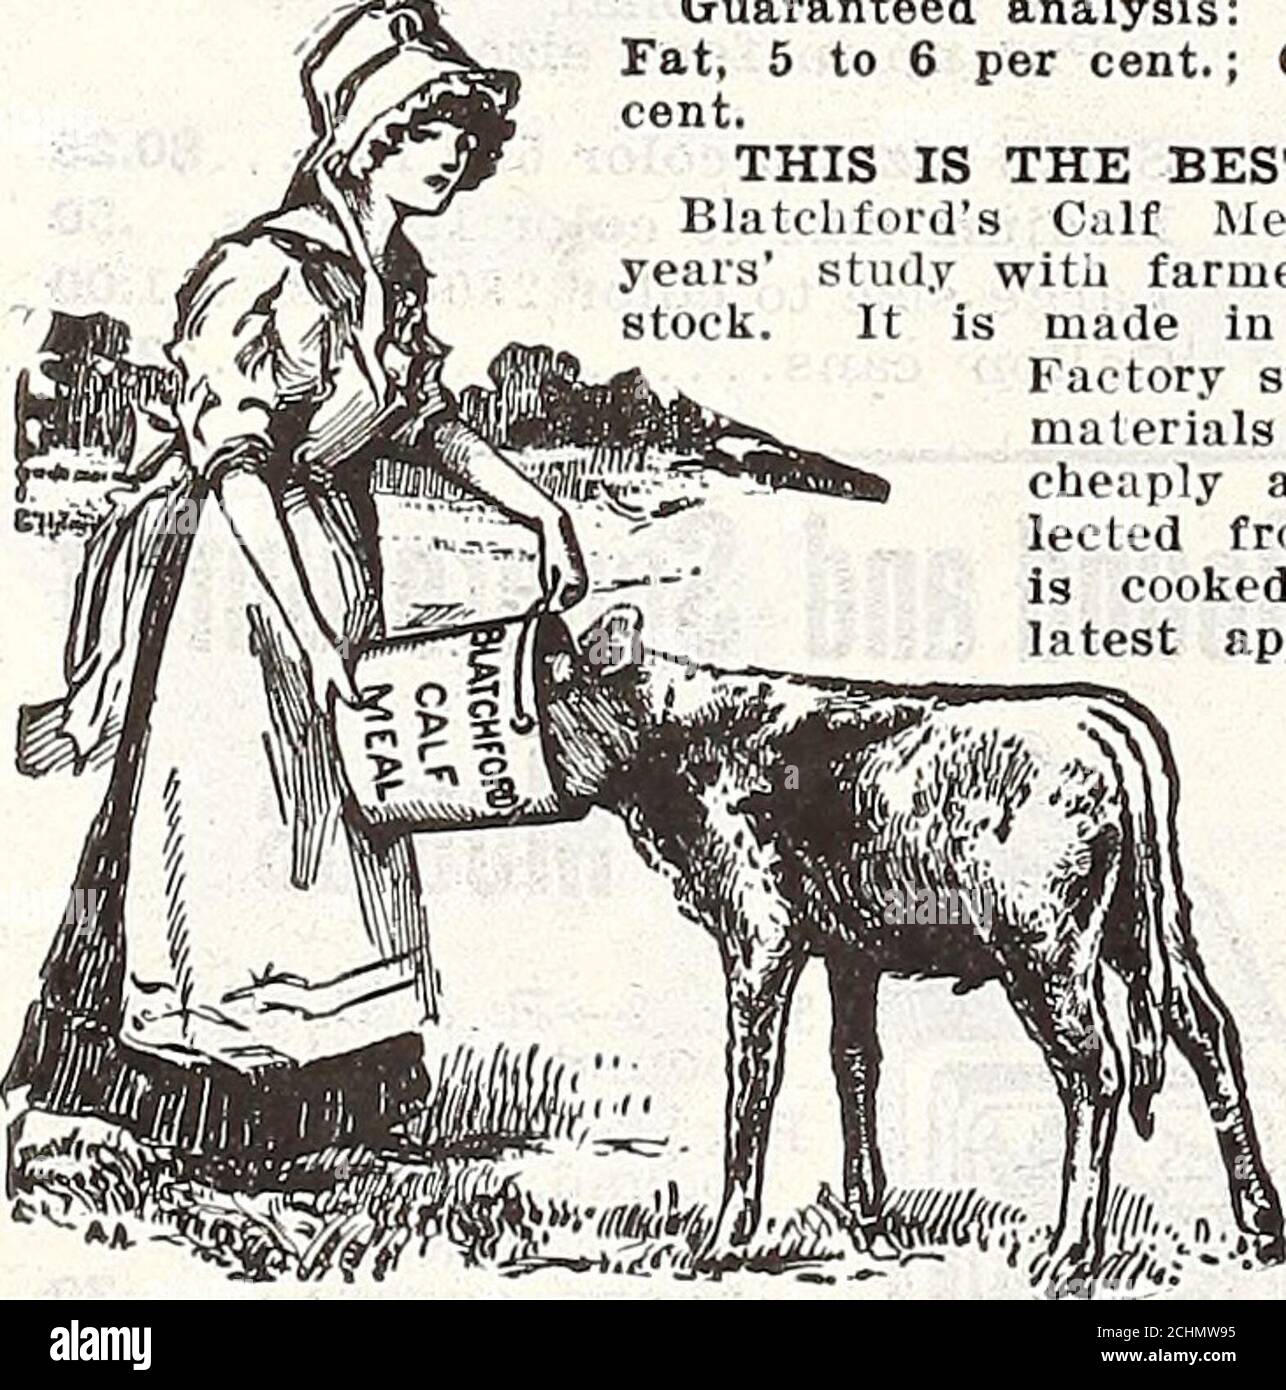 . 1915 Griffith and Turner Co. : farm and garden supplies . RICES CALF WEANERS Also Prevents Cows from SuctlngThemselves. No. 1, for Calves, Retail price,25c. List price, per doz...$3.50 No. 2, for Heifers, Retail price,40c. List price, per doz... 6.00 No. 3, for Cows, Retail price,60c, List price, per doz. . 8.50 DLATCHFORDS CALF MEAL Guaranteed analysis: Protein, 24 to 26 per cent.;Fat, 5 to 6 per cent.; Carbohydrates, 51 to 63 percent. THIS IS THE BEST MILK SUBSTITUTE. Blatclifoids Calf Meal is the result of manyyears stiul.r with farmers, breeders and raisers ofIt is made in an e.xclusivel Stock Photo